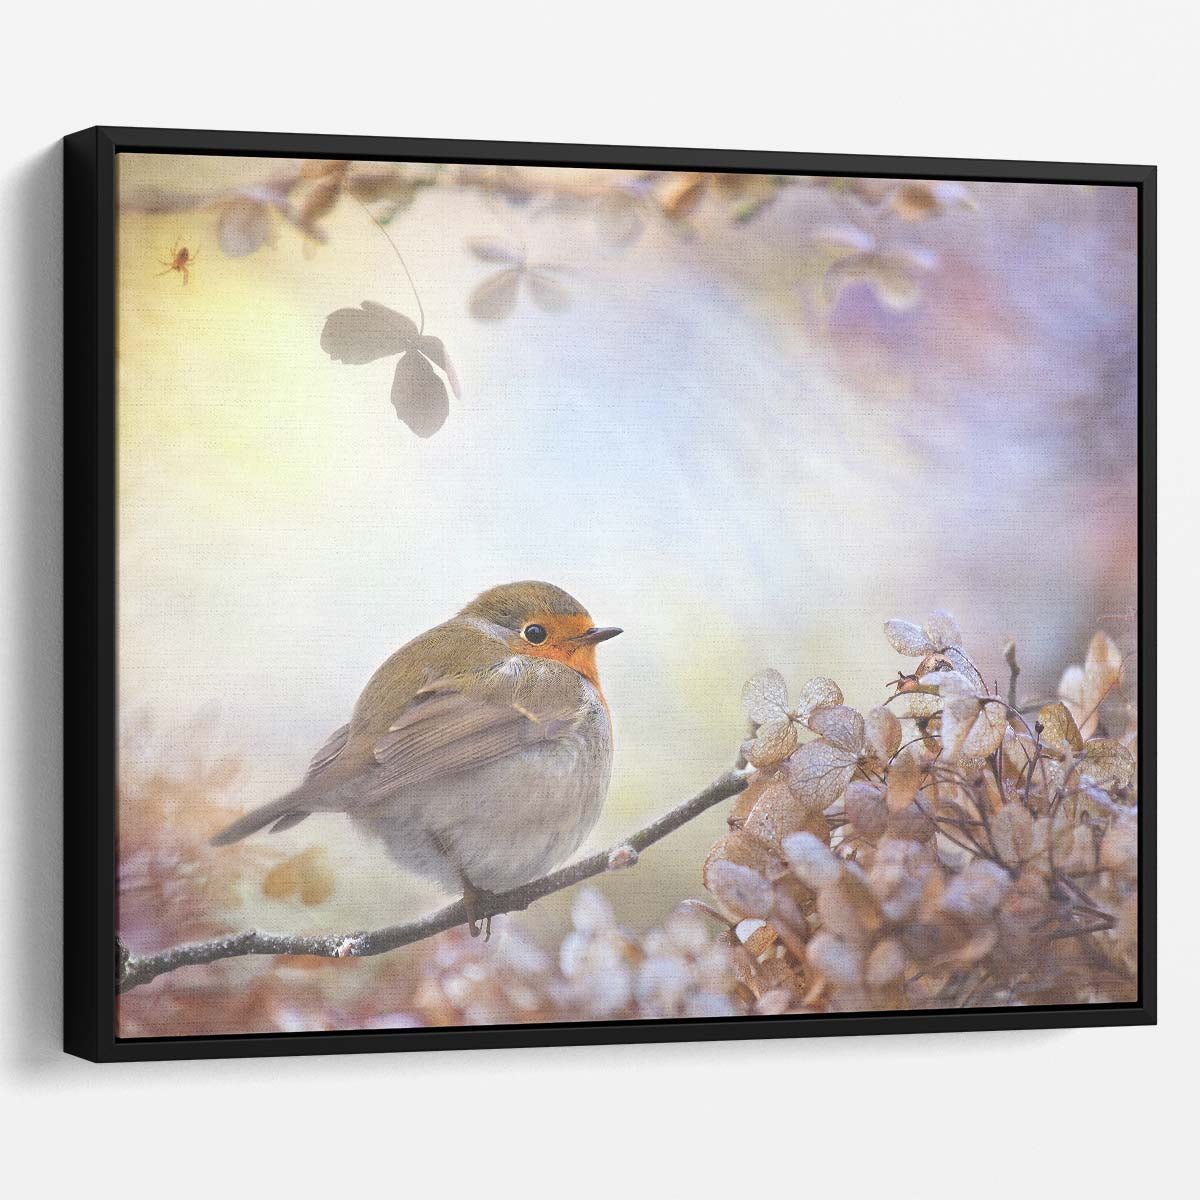 Enchanted Robin & Hydrangea Winter Dream Wall Art by Luxuriance Designs. Made in USA.